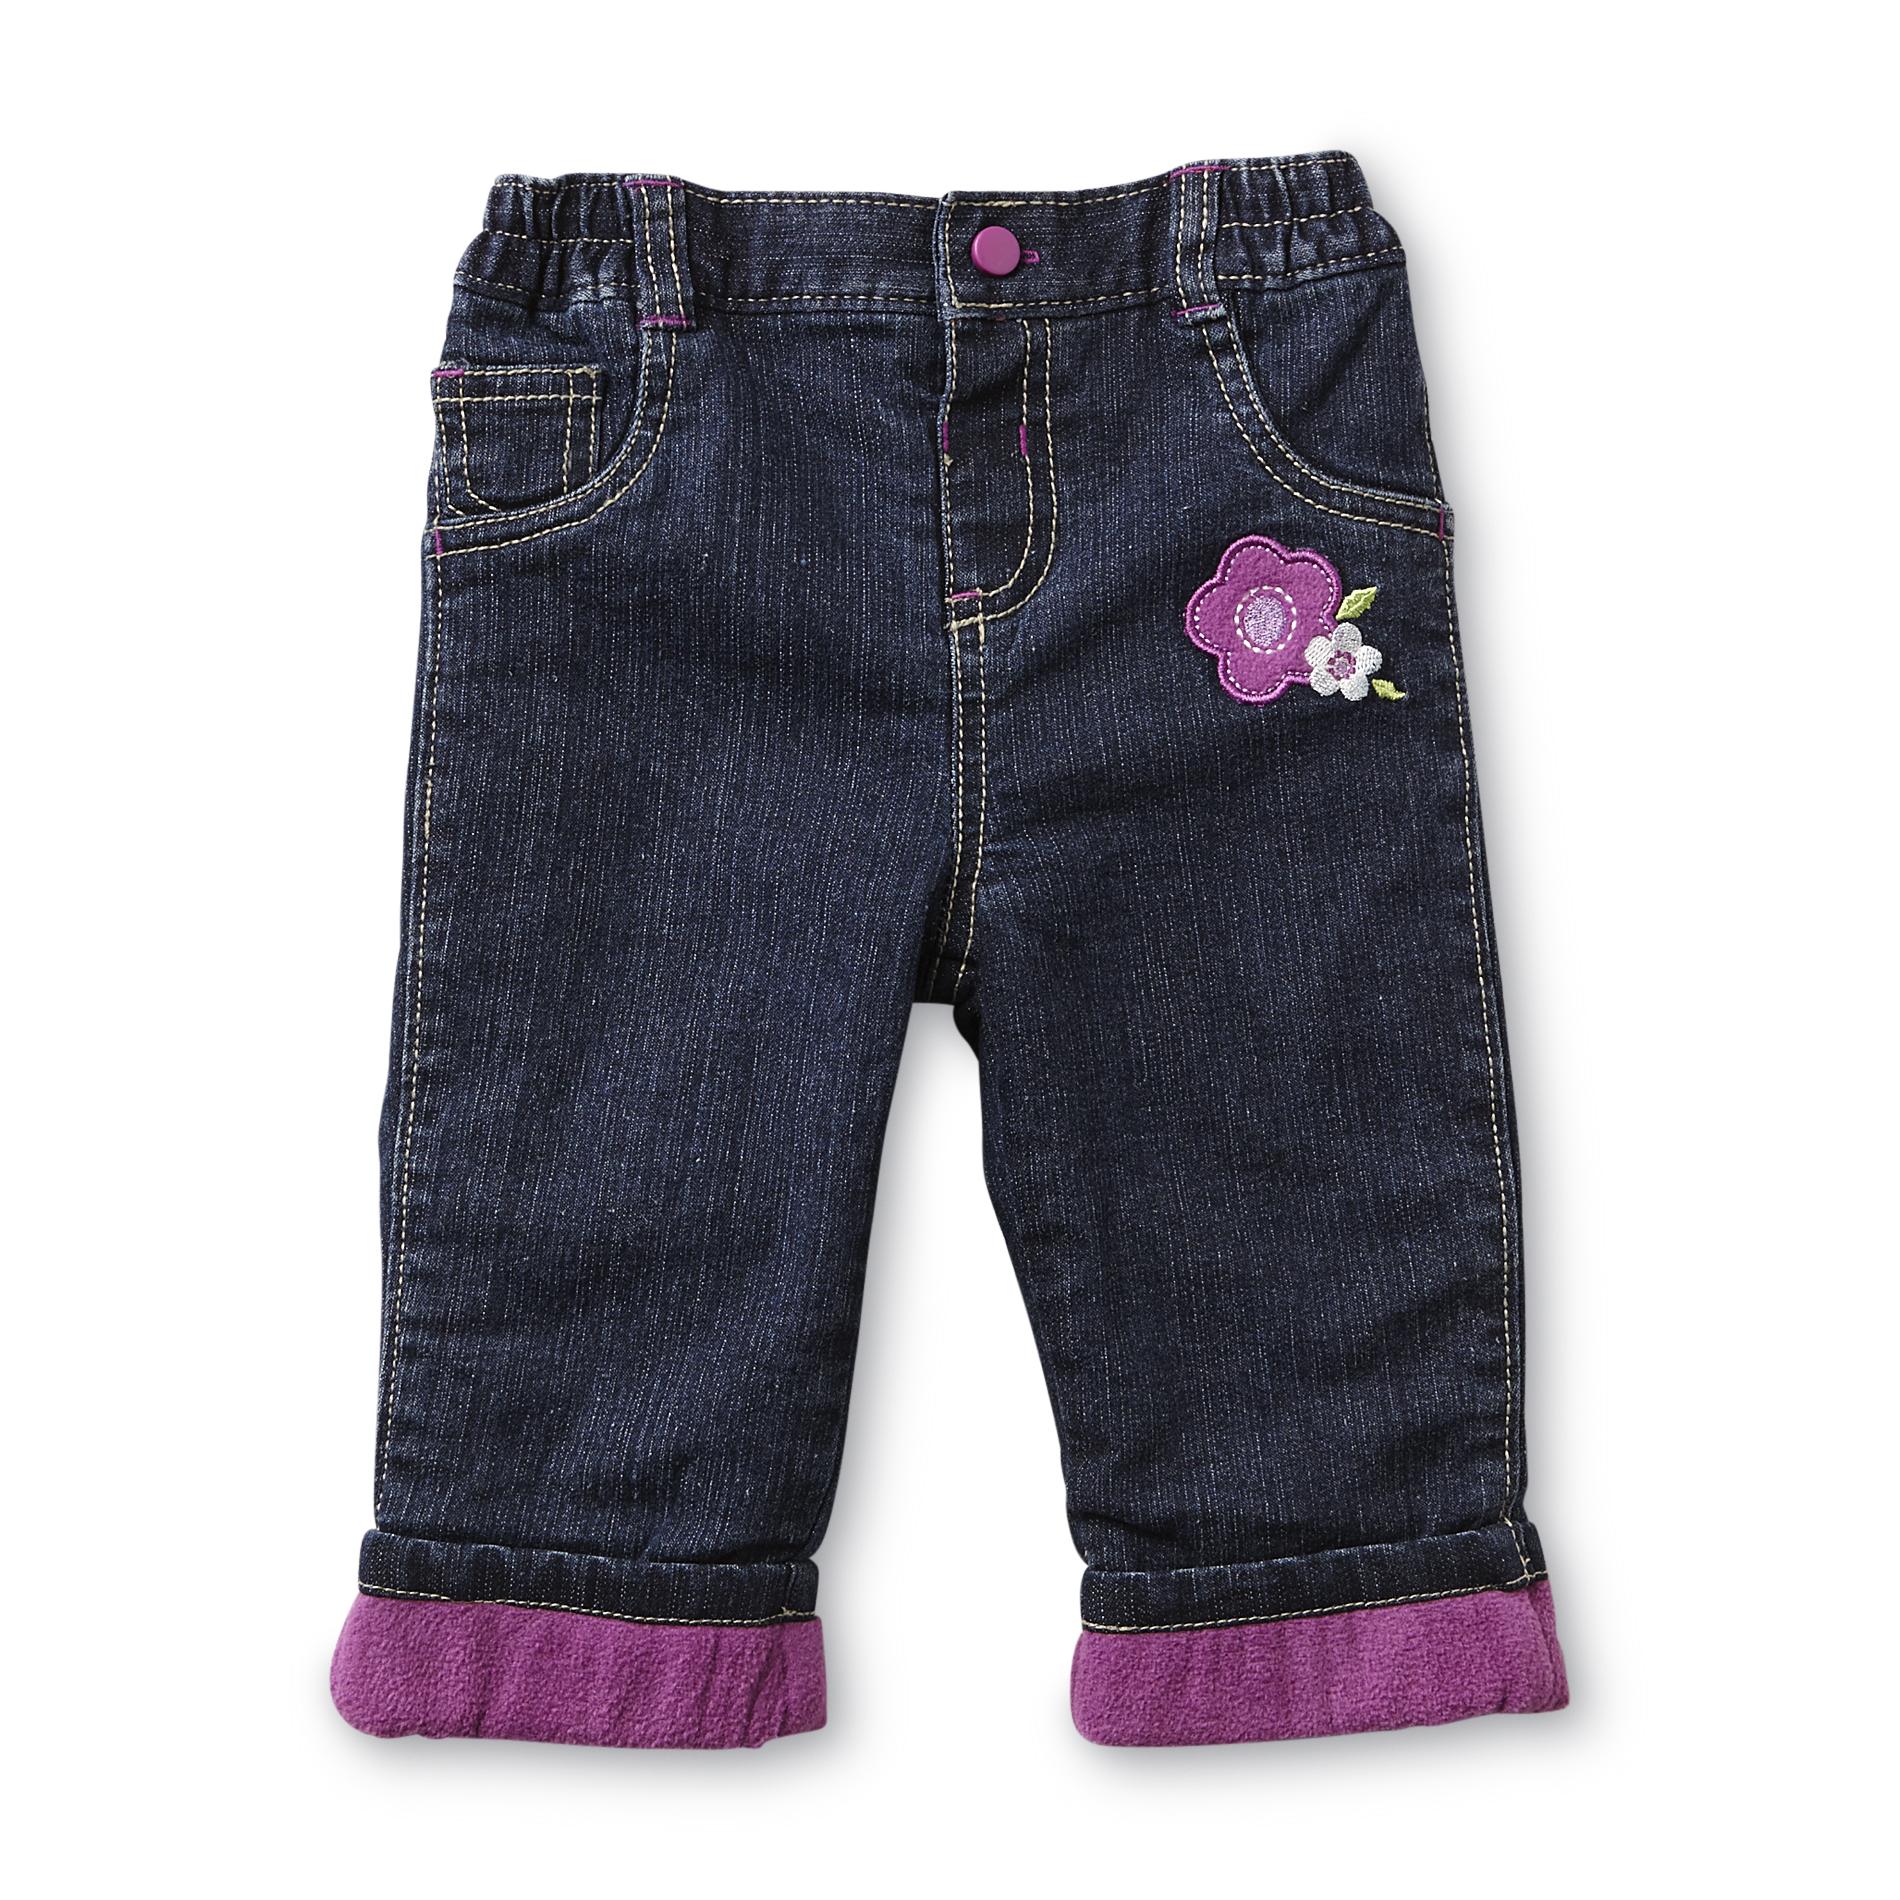 Small Wonders Infant Girl's Embroidered Fleece-Lined Jeans - Flowers